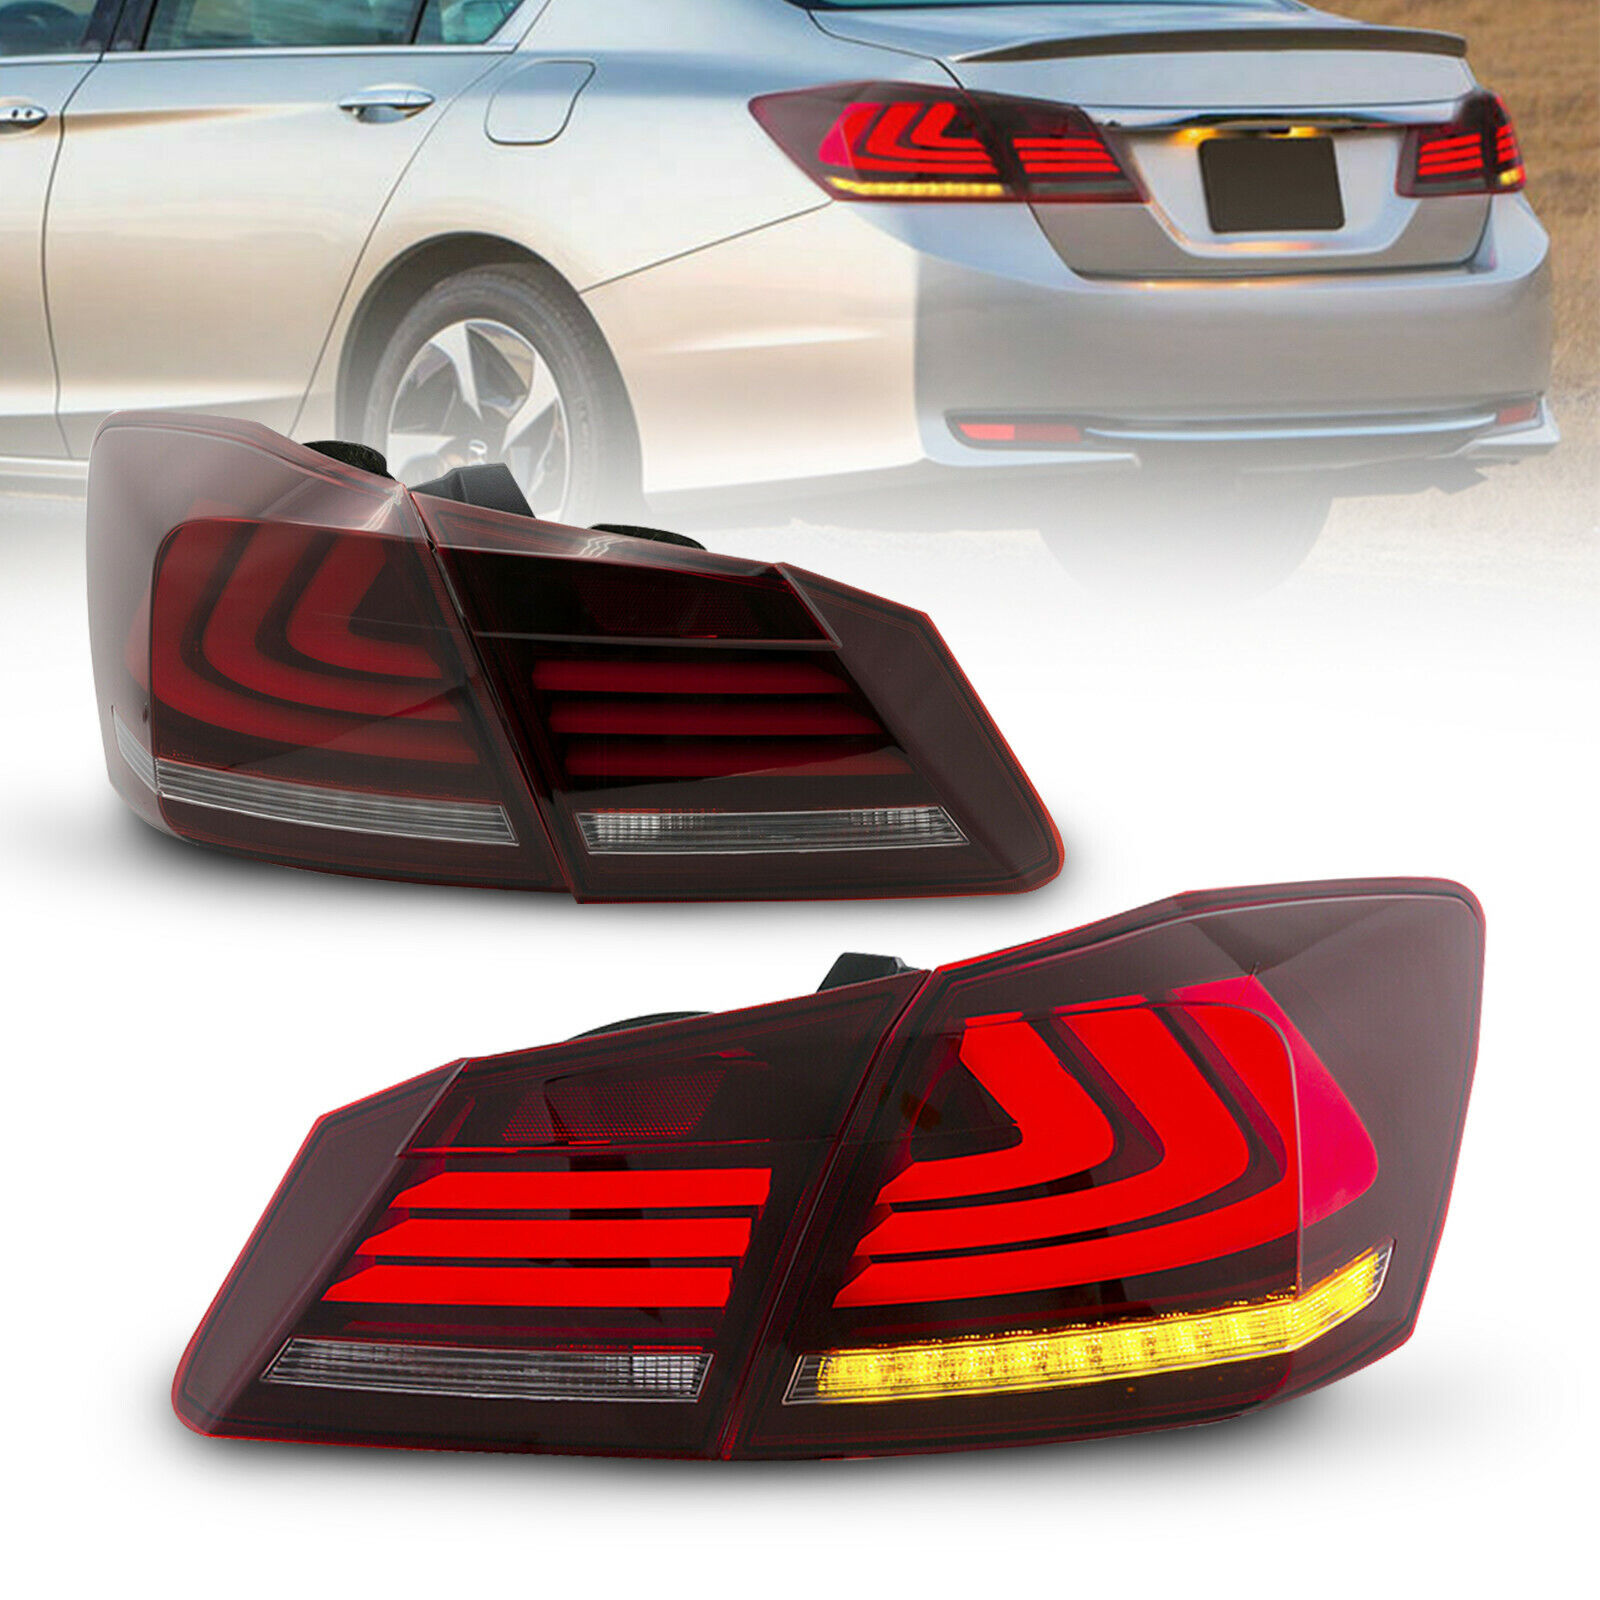 Red Clear LED Tail Lights Rear Lamps for 2013-2015 Honda Accord 4 Door Sedan